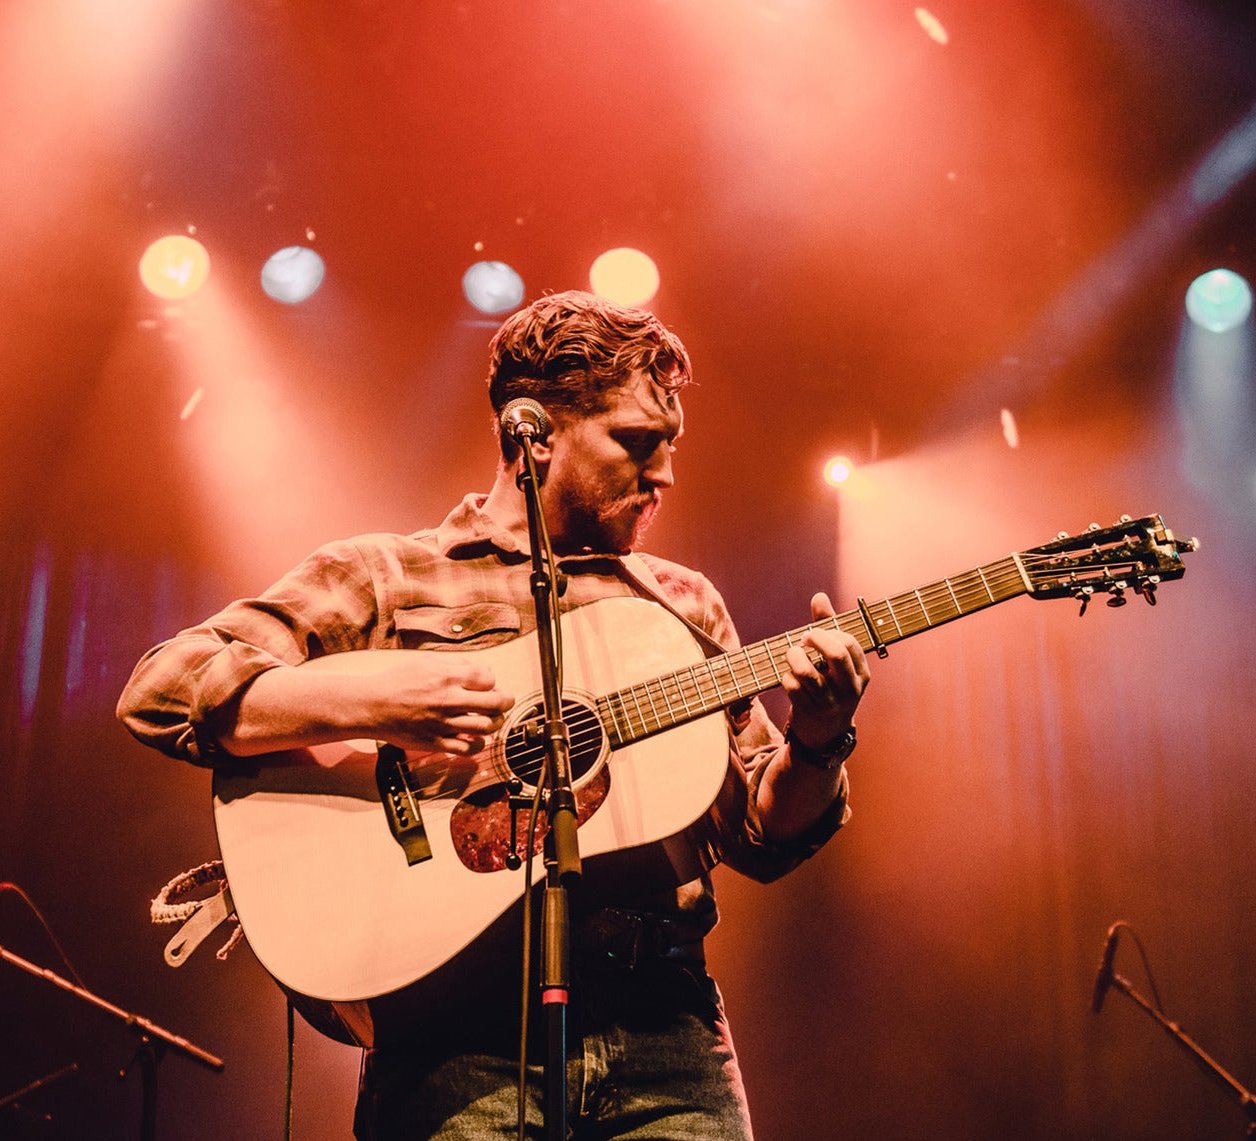 Want to win two tickets to see Tyler Childers in Charlotte? CLTure